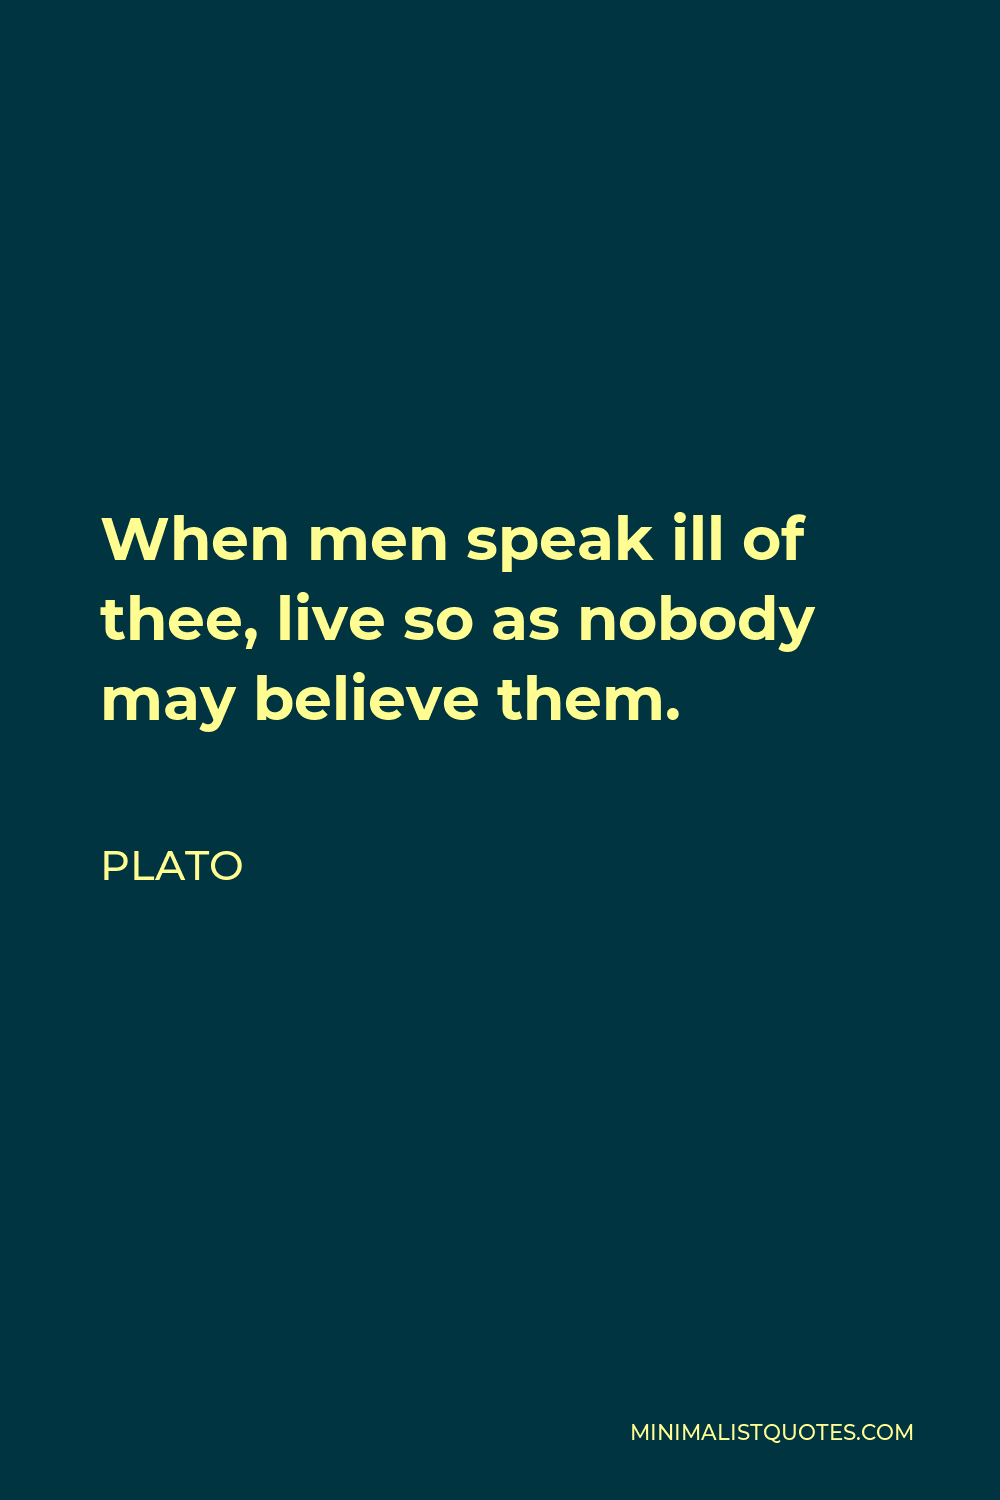 Plato Quote - When men speak ill of thee, live so as nobody may believe them.